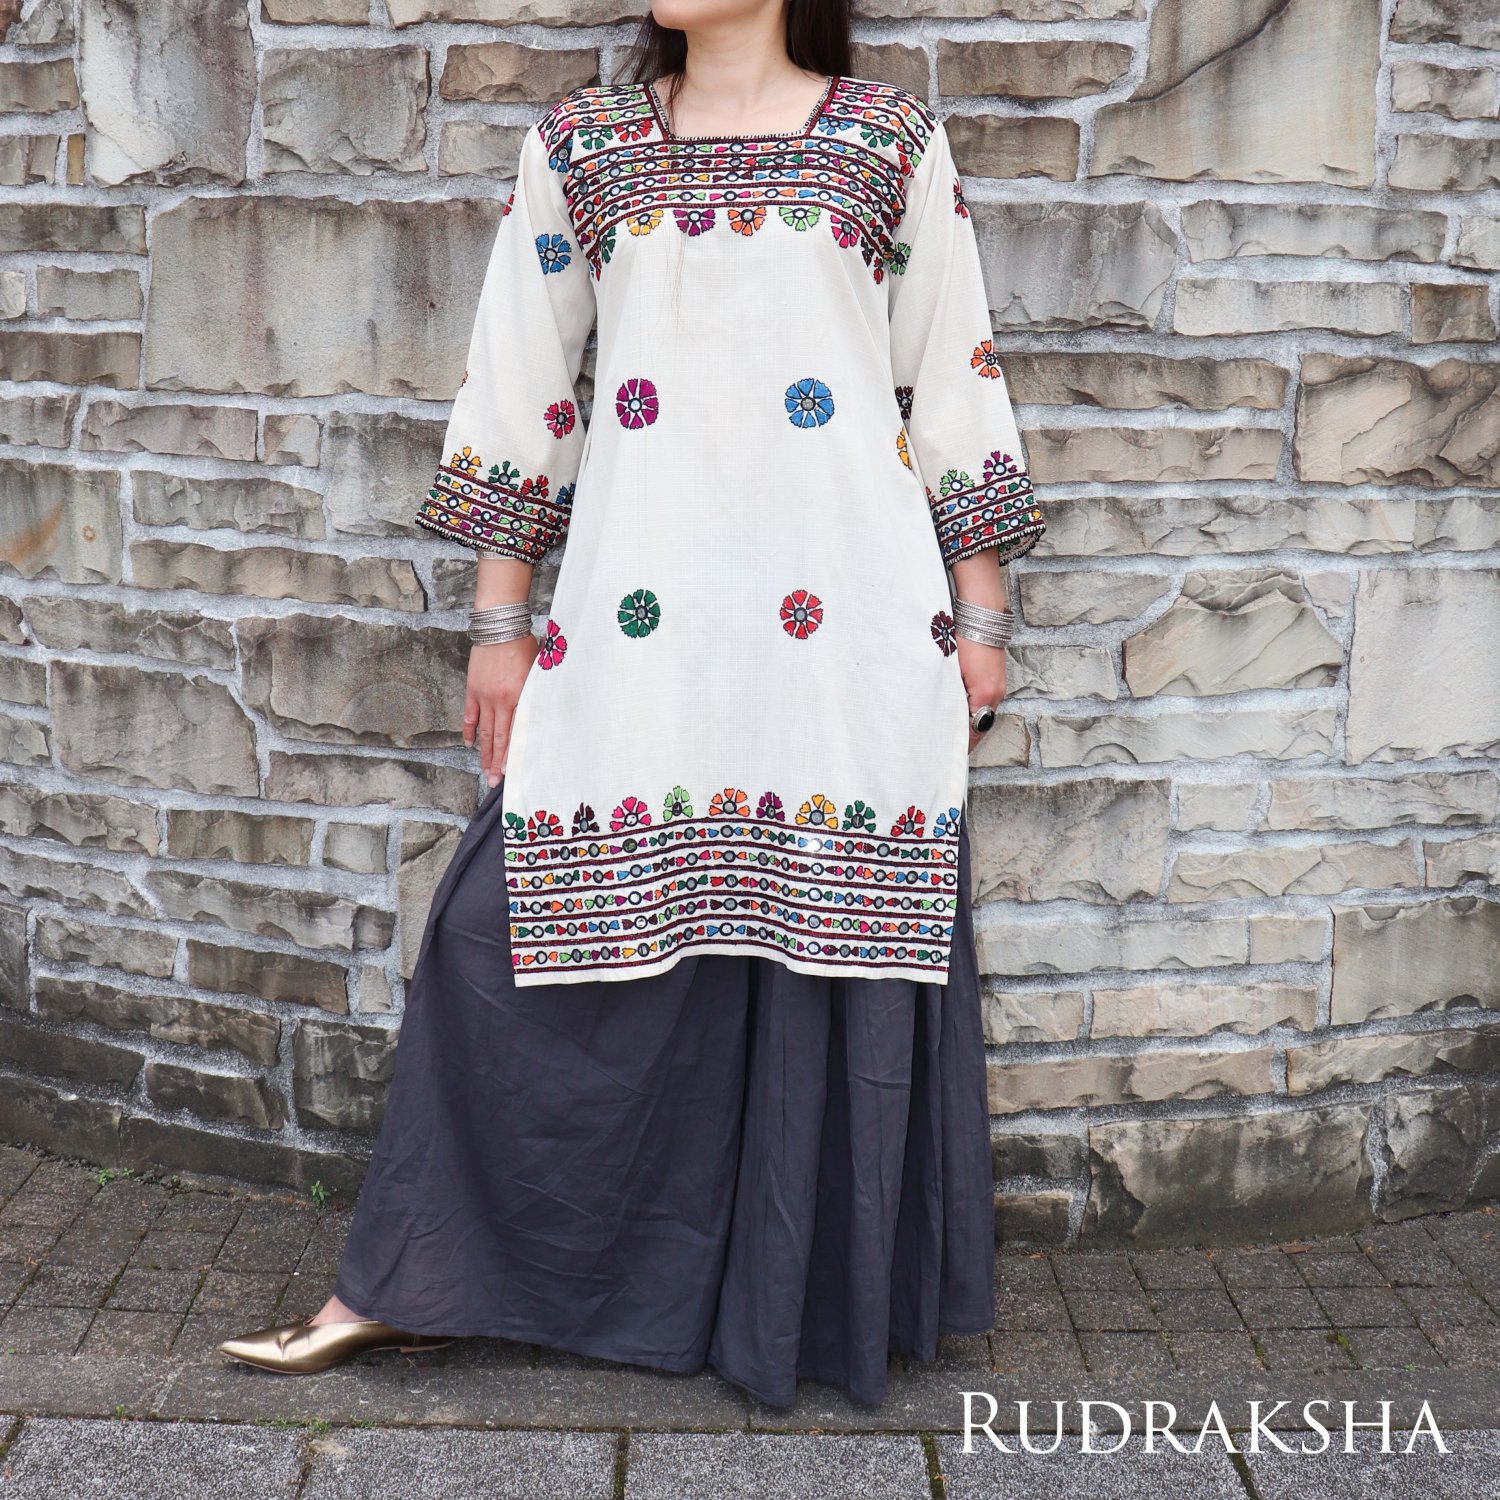 <img class='new_mark_img1' src='https://img.shop-pro.jp/img/new/icons61.gif' style='border:none;display:inline;margin:0px;padding:0px;width:auto;' />Balochi dress レア☆Vintage≪キナリ≫バロチドレスワンピース